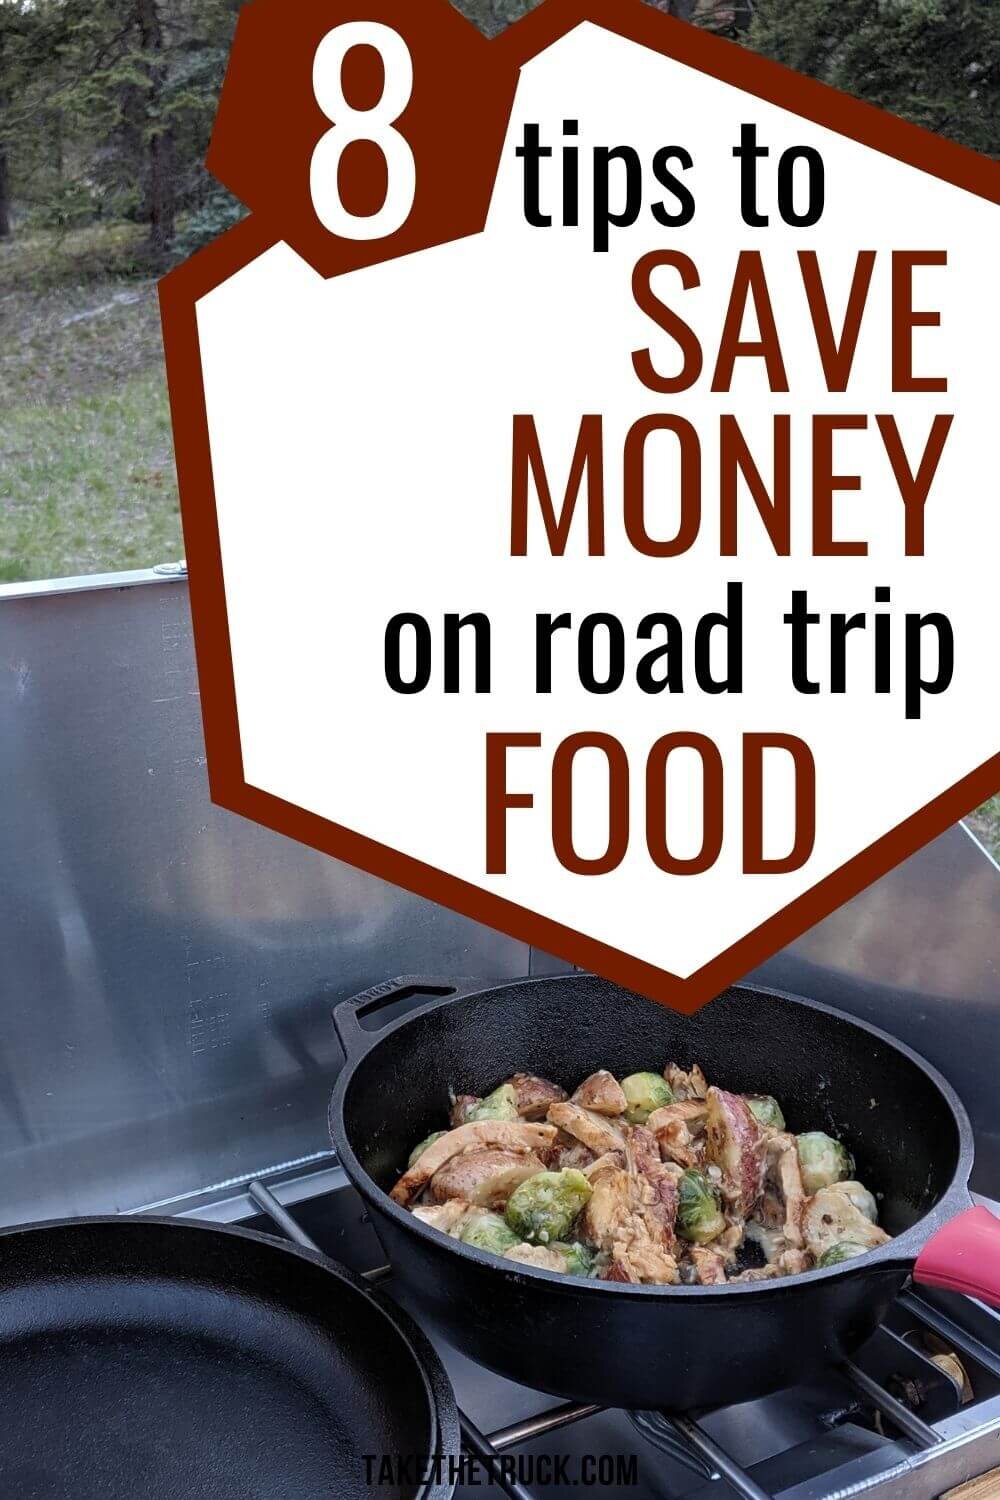 Learn how to save money on food on a road trip with these 8 simple road trip food and meal tips. Budget road trip meals and food can be healthy, good, and help you save money.